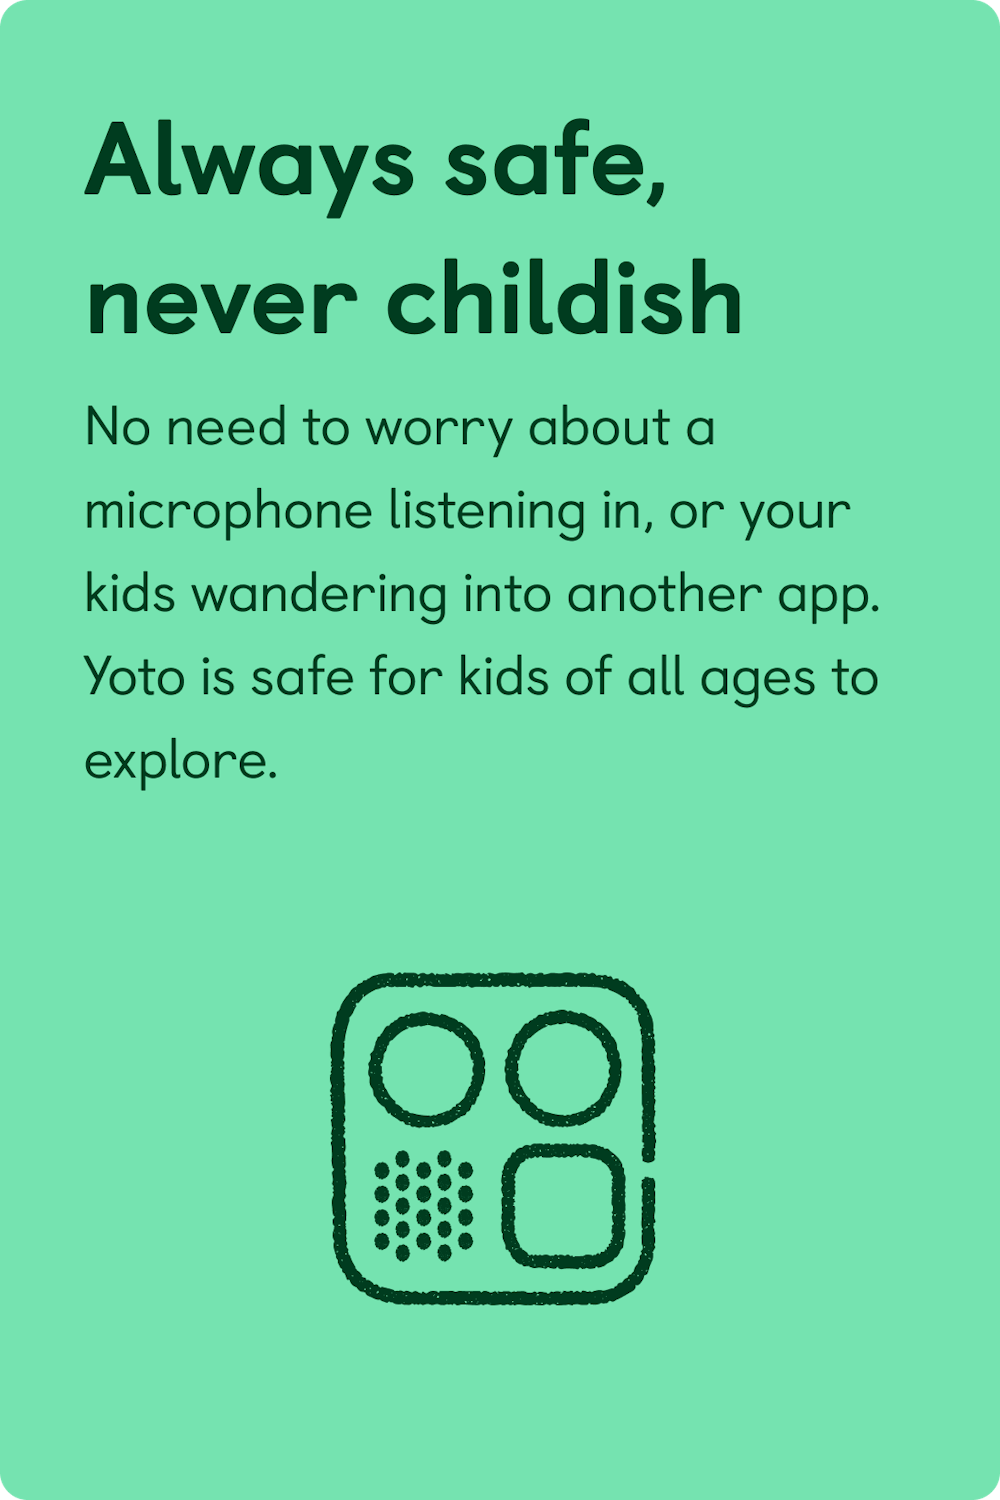 Always safe, never childish. No need to worry about a microphone listening in.